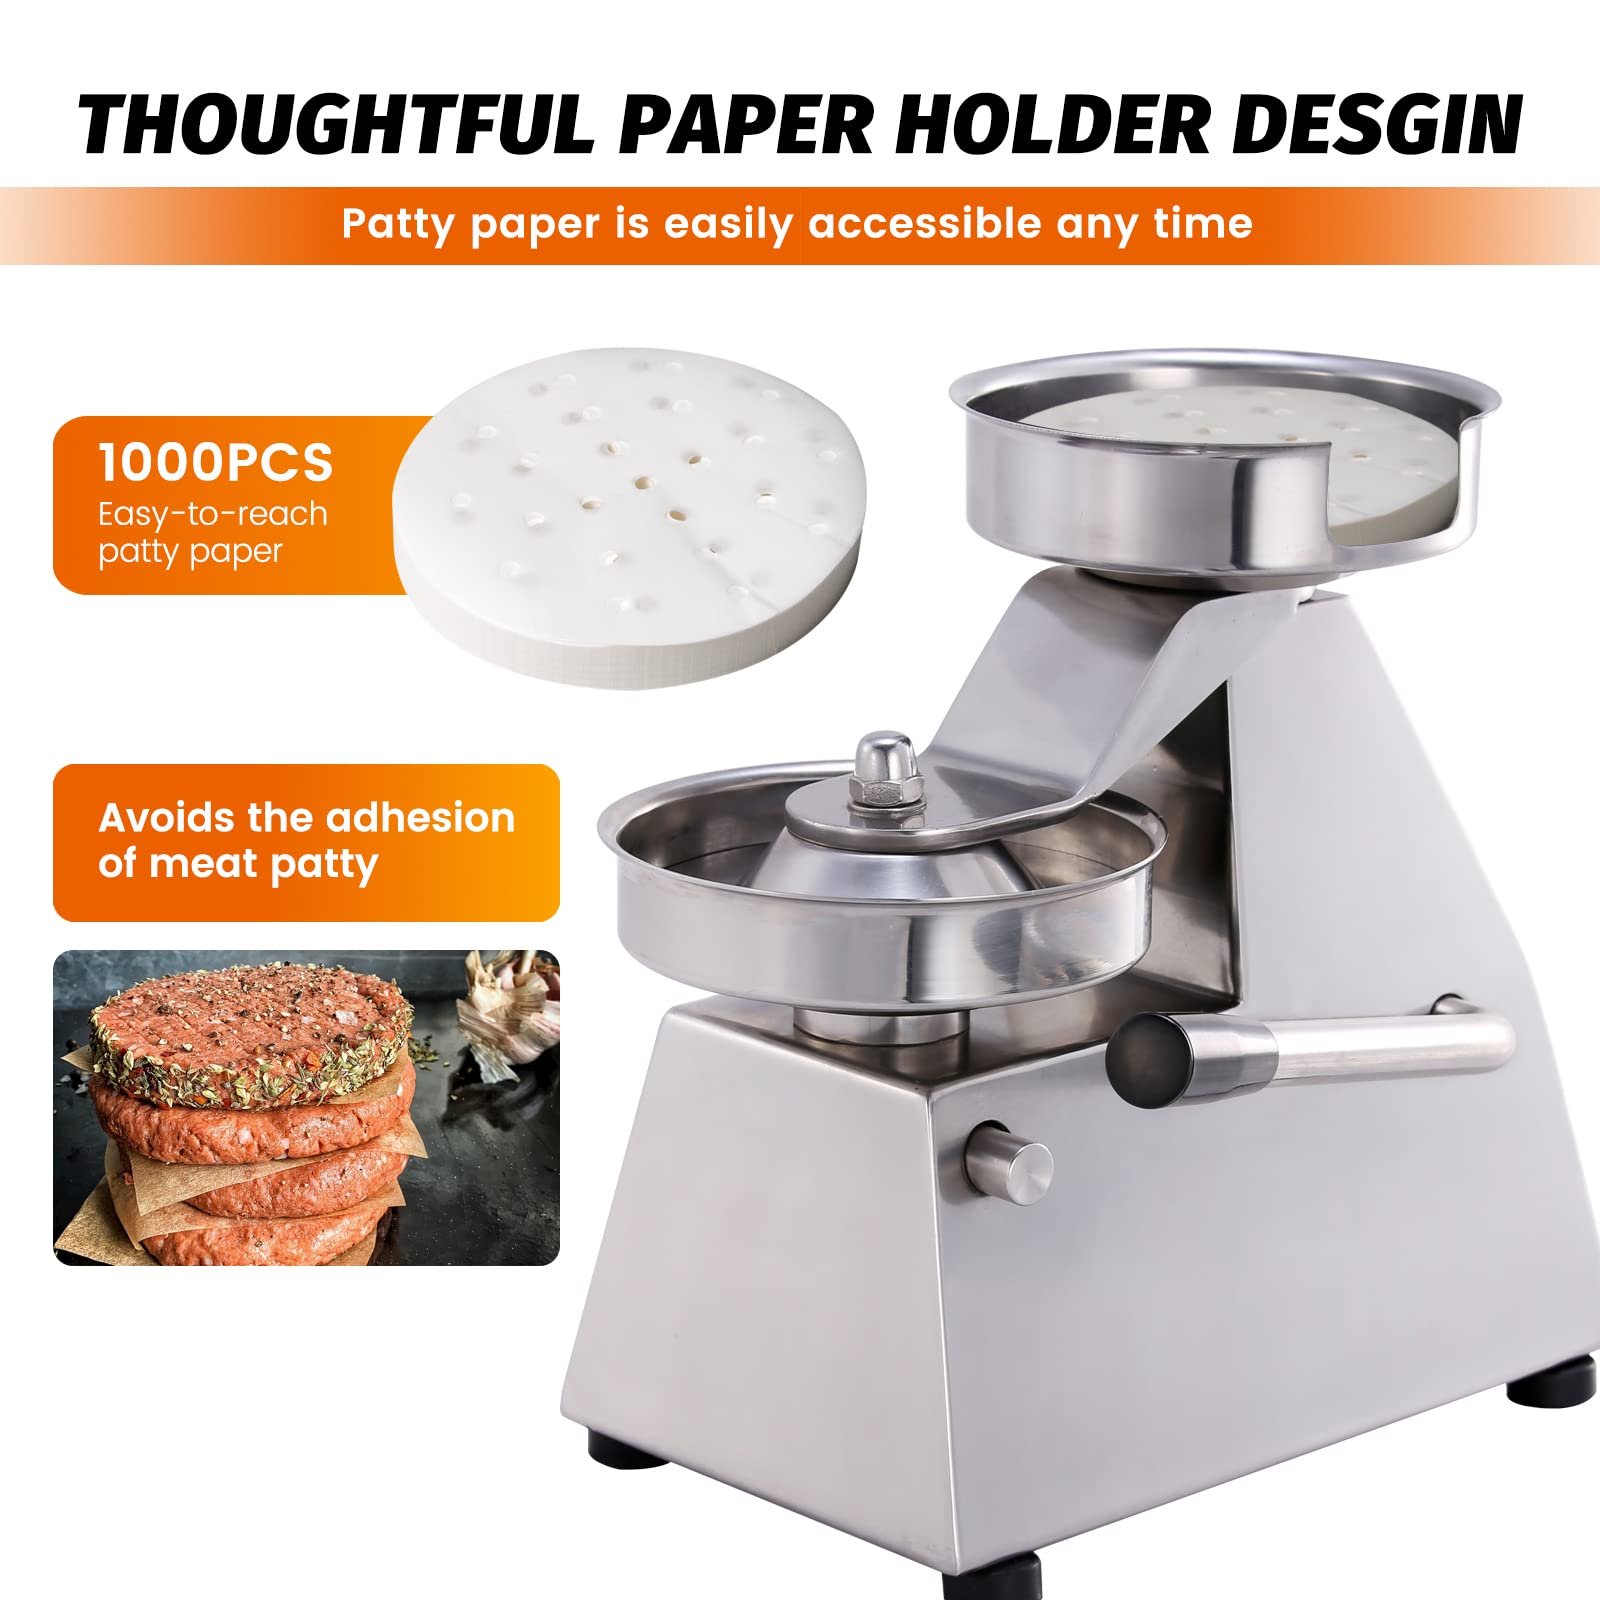 Hakka Commercial 5.5 L Multifunction Meat Bowl Cutter Mixer and